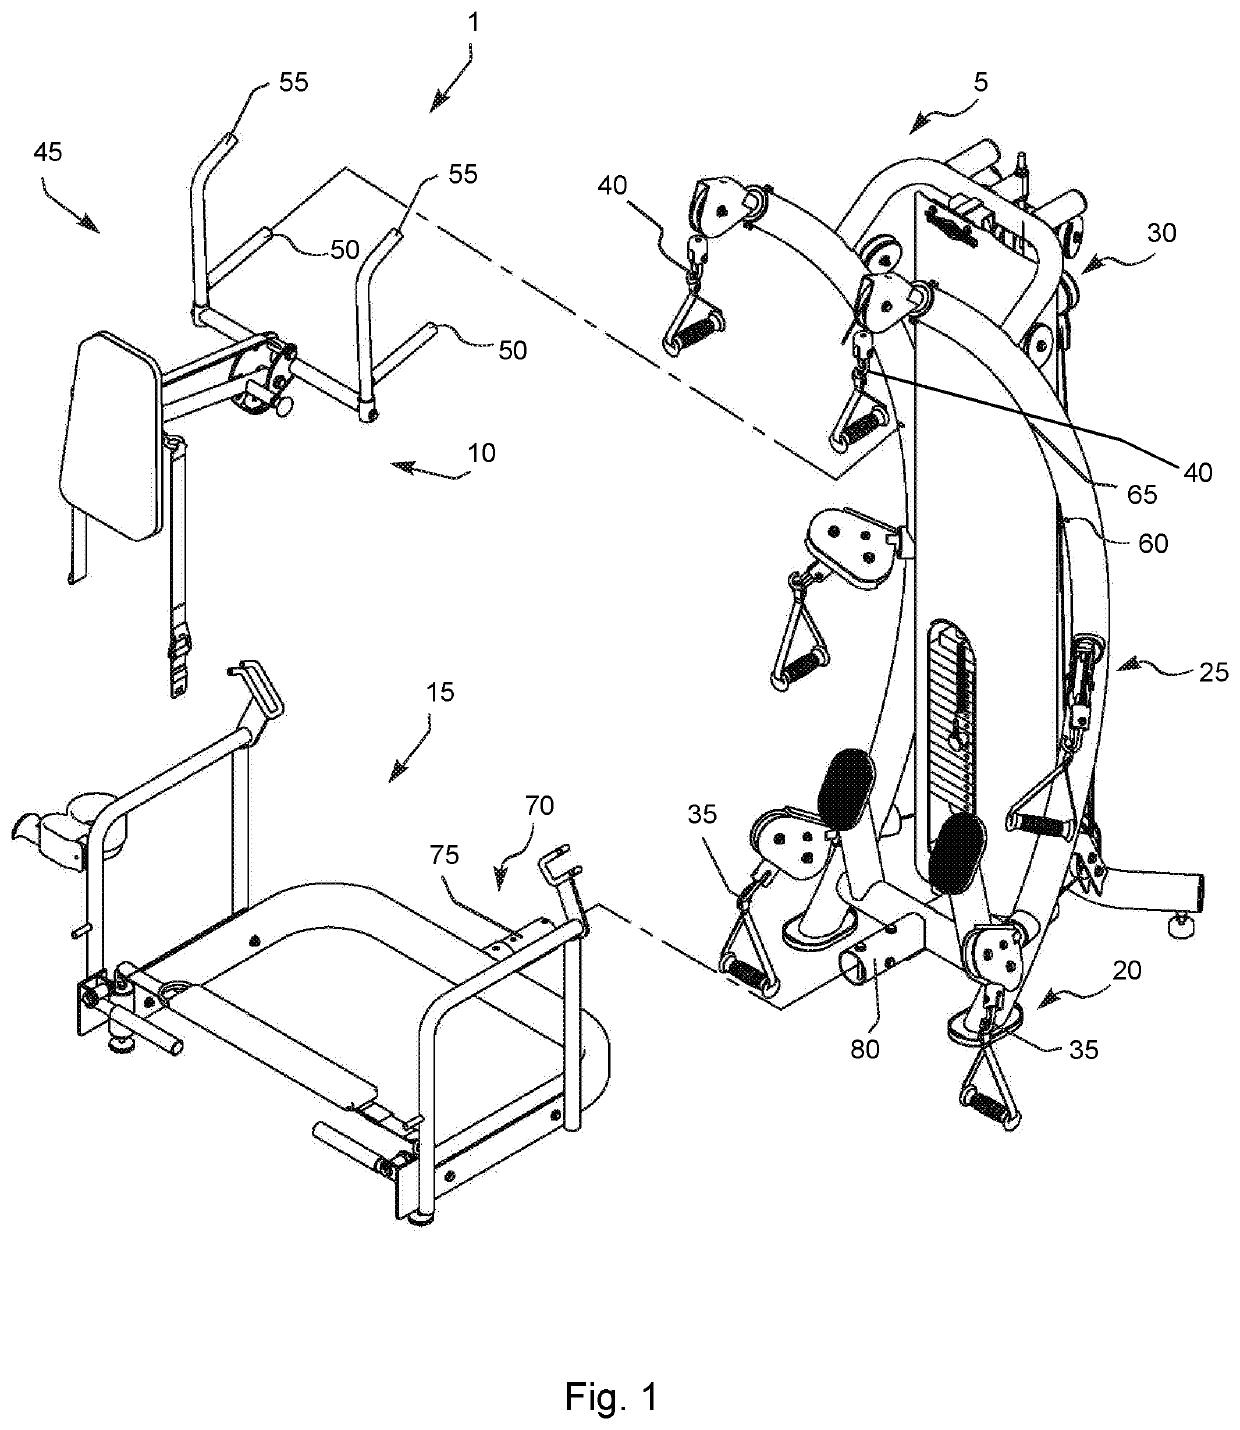 Wheelchair attachment for exercise equipment